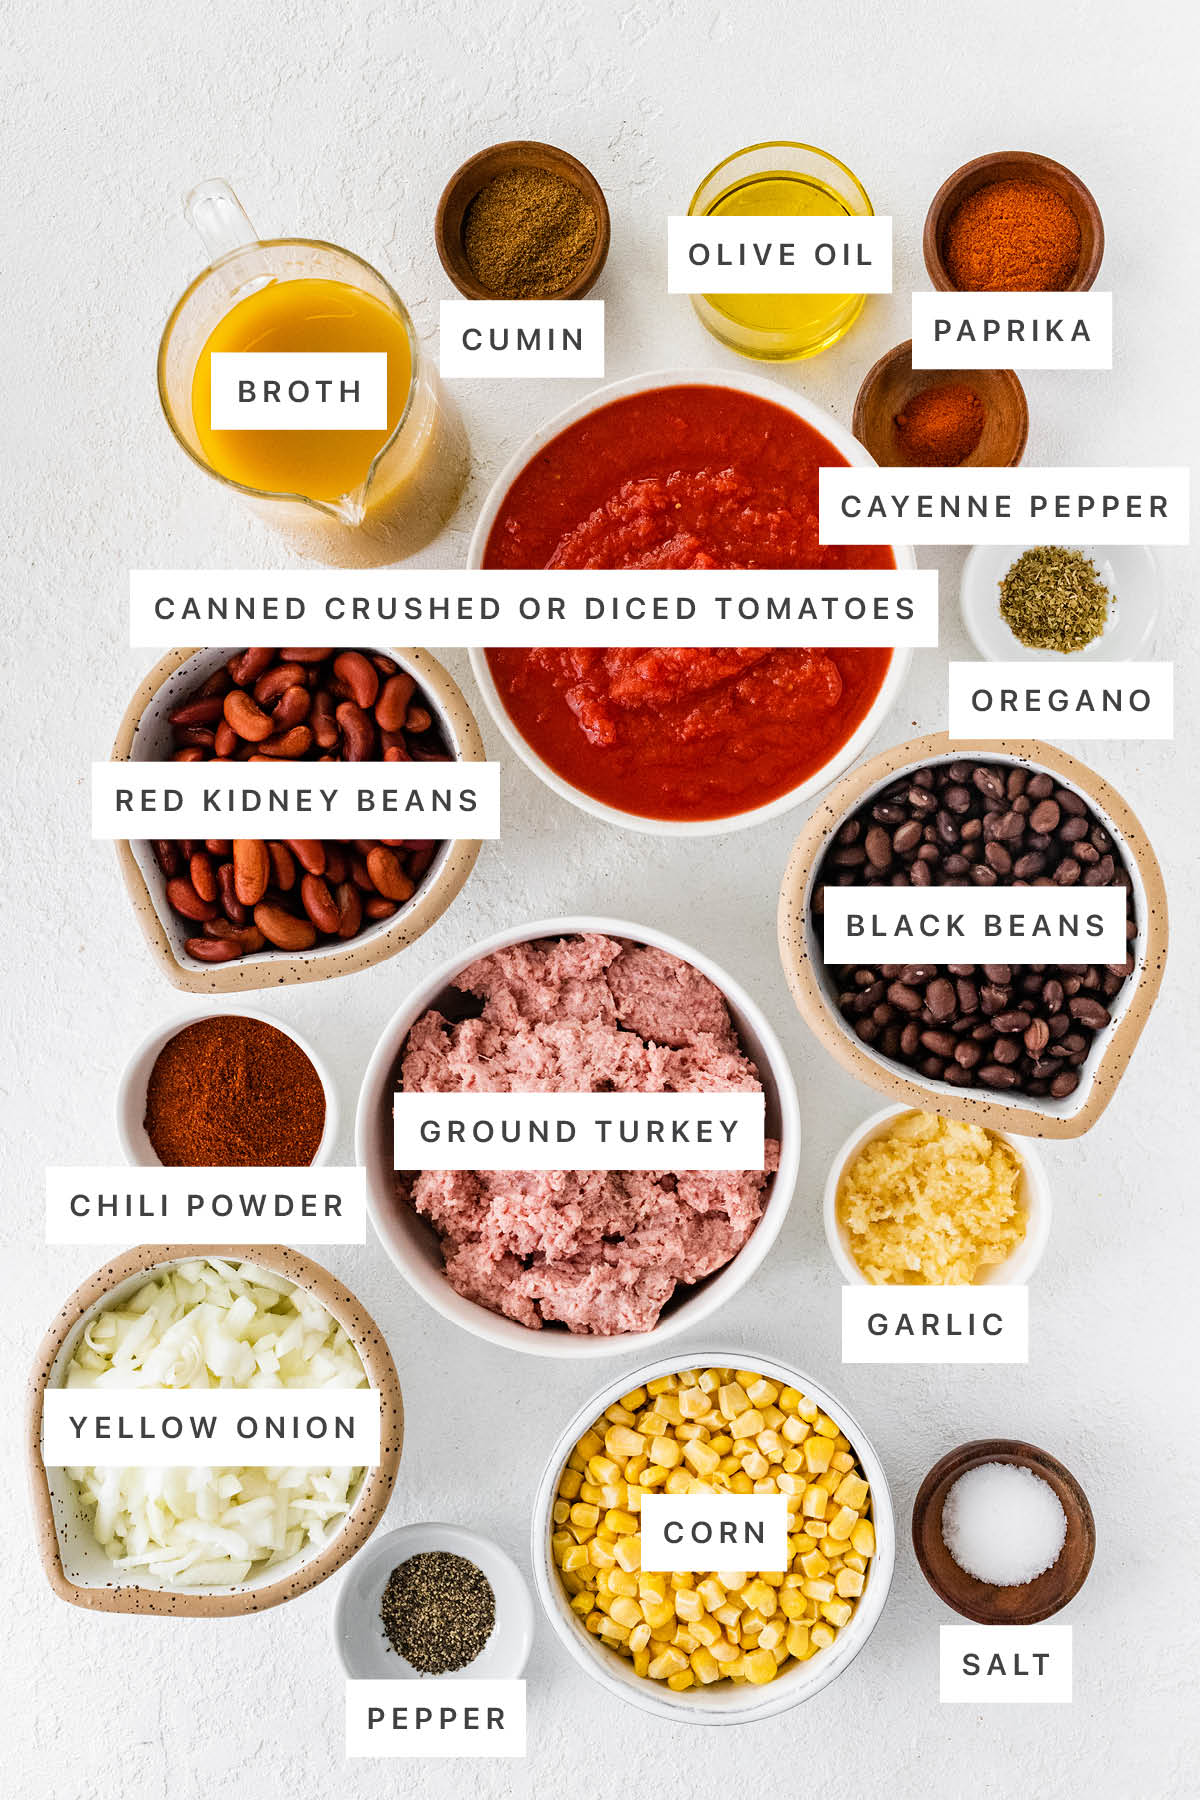 Ingredients measured out to make Turkey Chili: broth, cumin, olive oil, paprika, cayenne pepper, canned crushed tomatoes, oregano, kidney beans, black beans, chili powder, ground turkey, garlic, yellow onion, pepper, corn and salt.